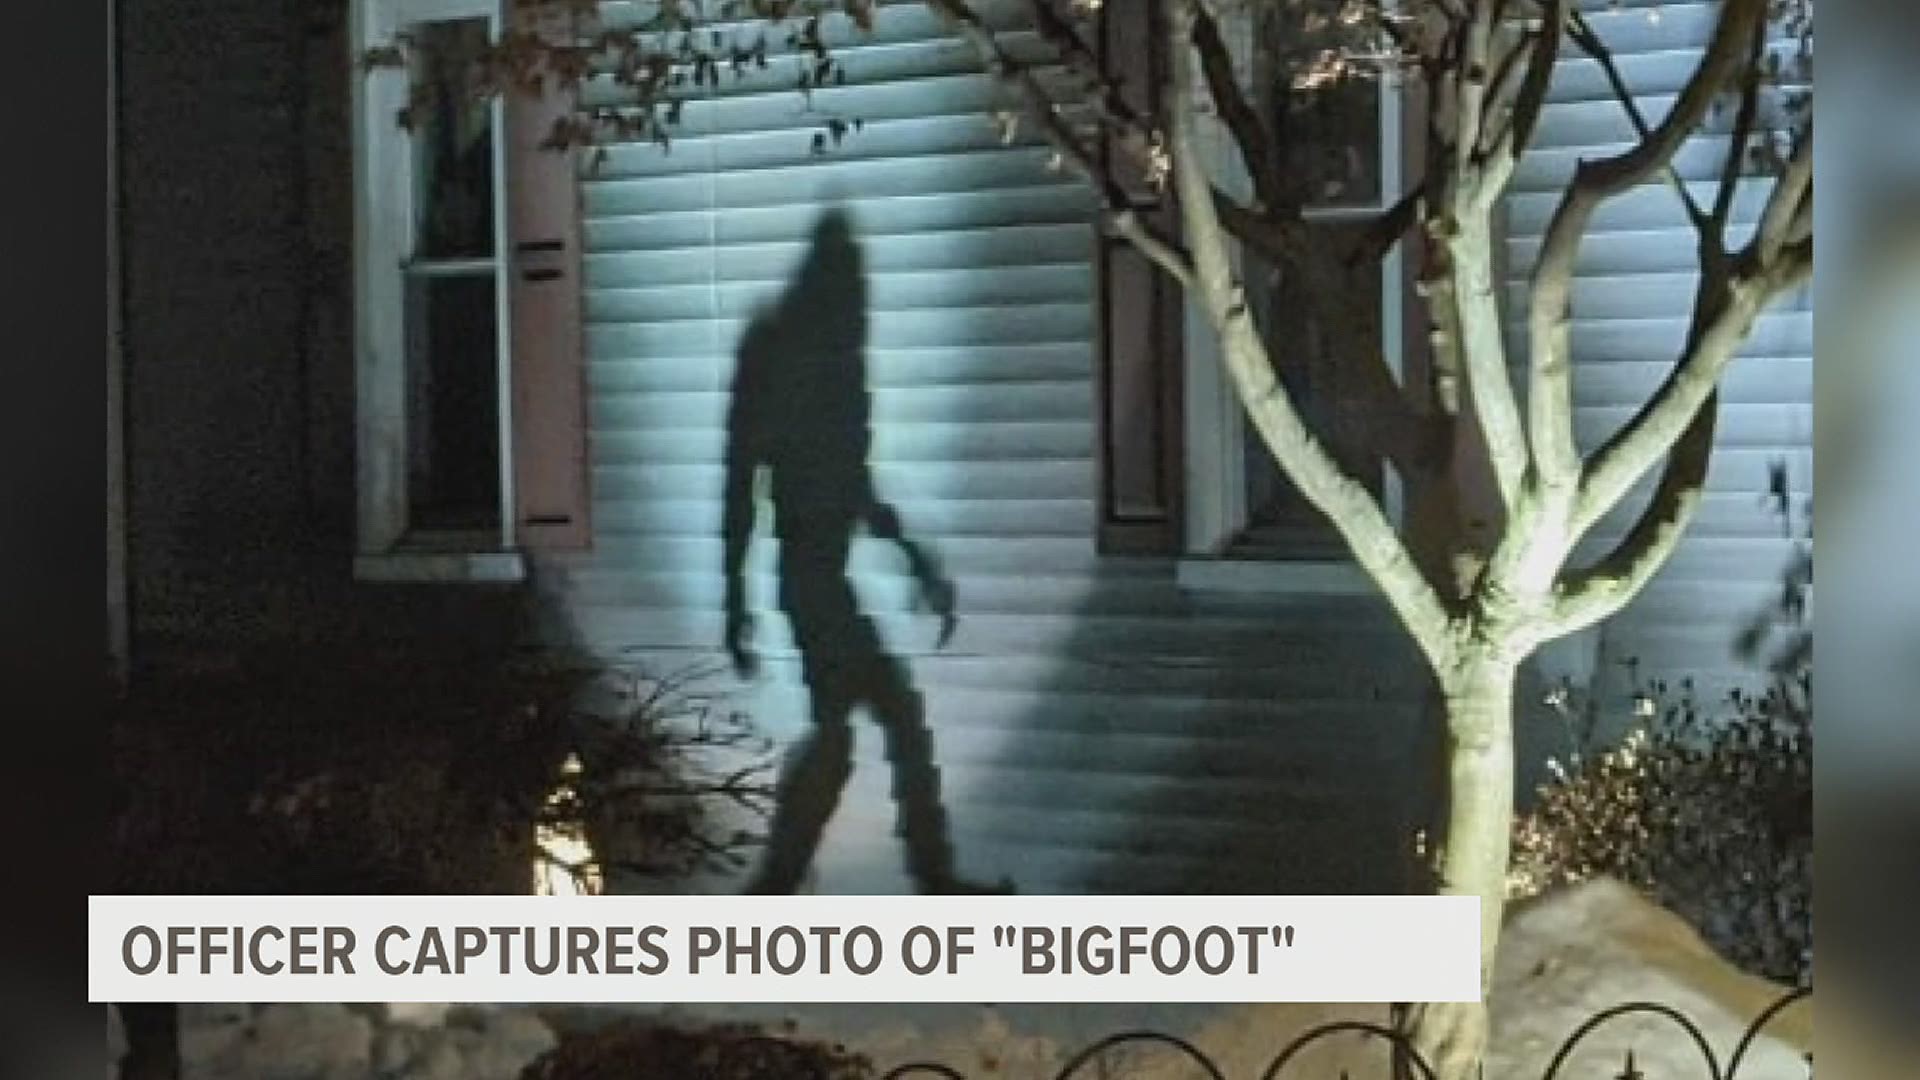 An officer on vehicle patrol overnight snapped some photos of a shadowy encounter with Bigfoot near a home in the borough.